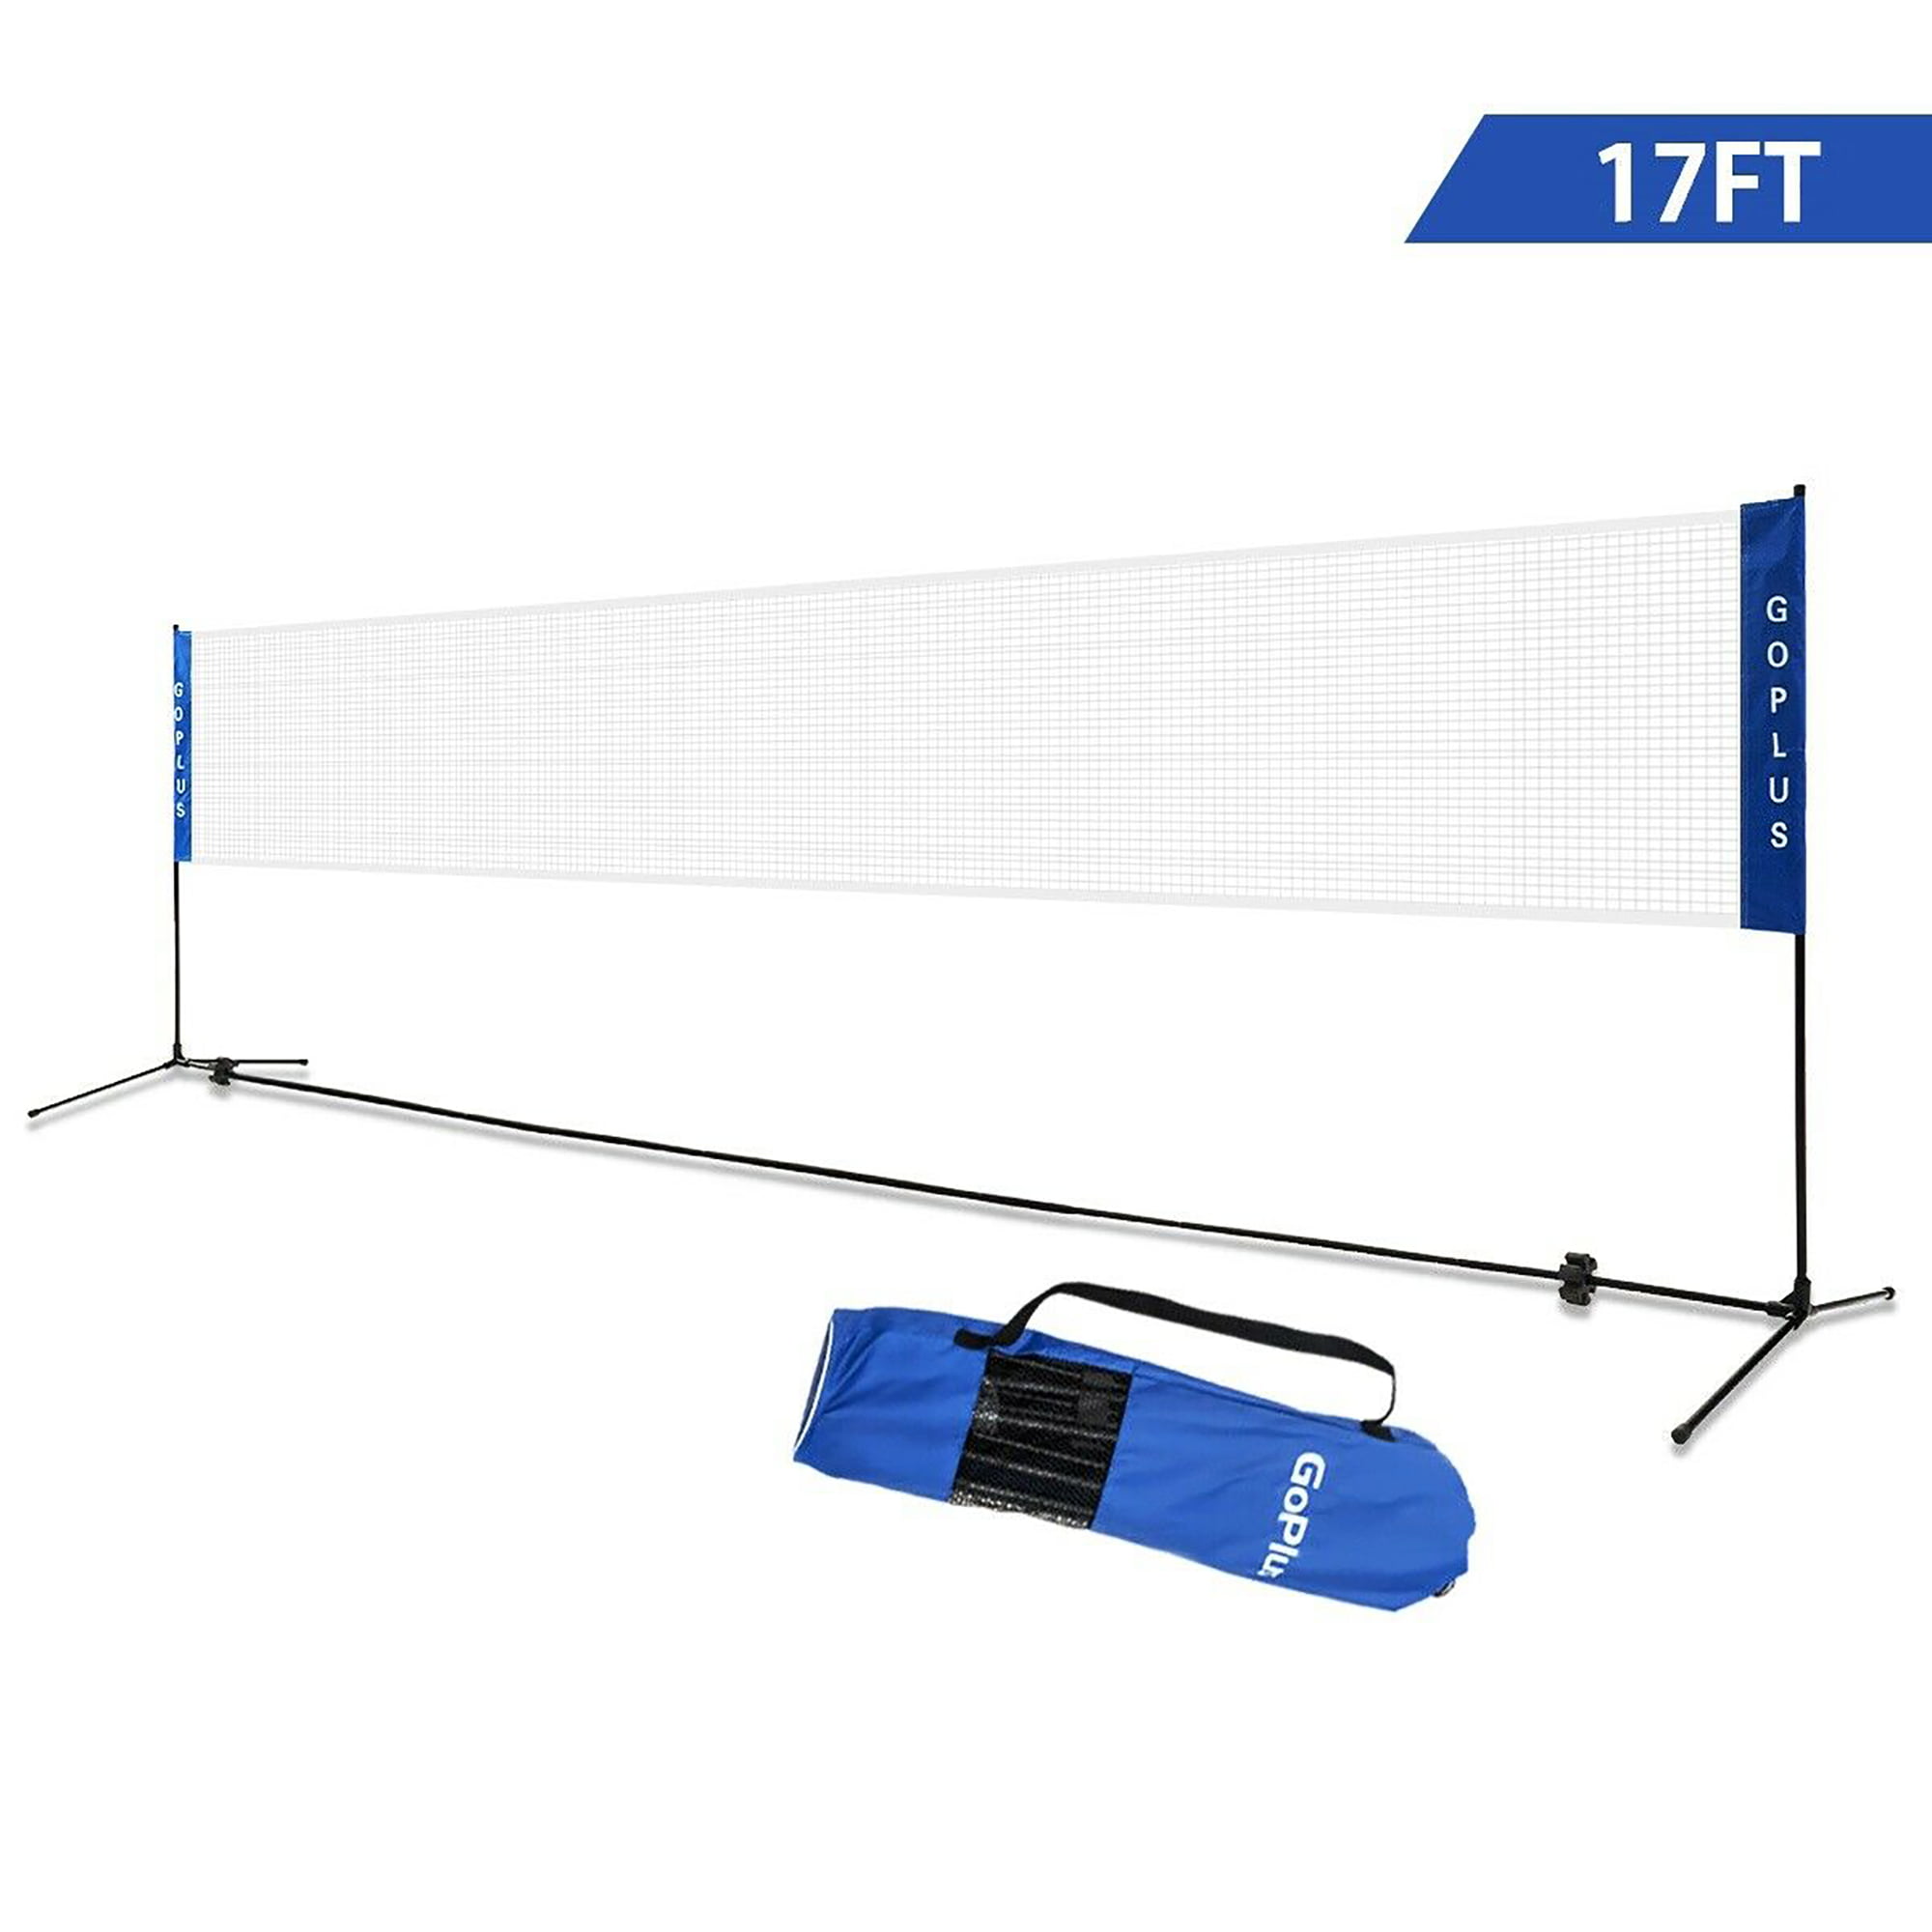 Portable Volleyball Net Set System for Team Sports Games Kids Adults 17*2 Feet 